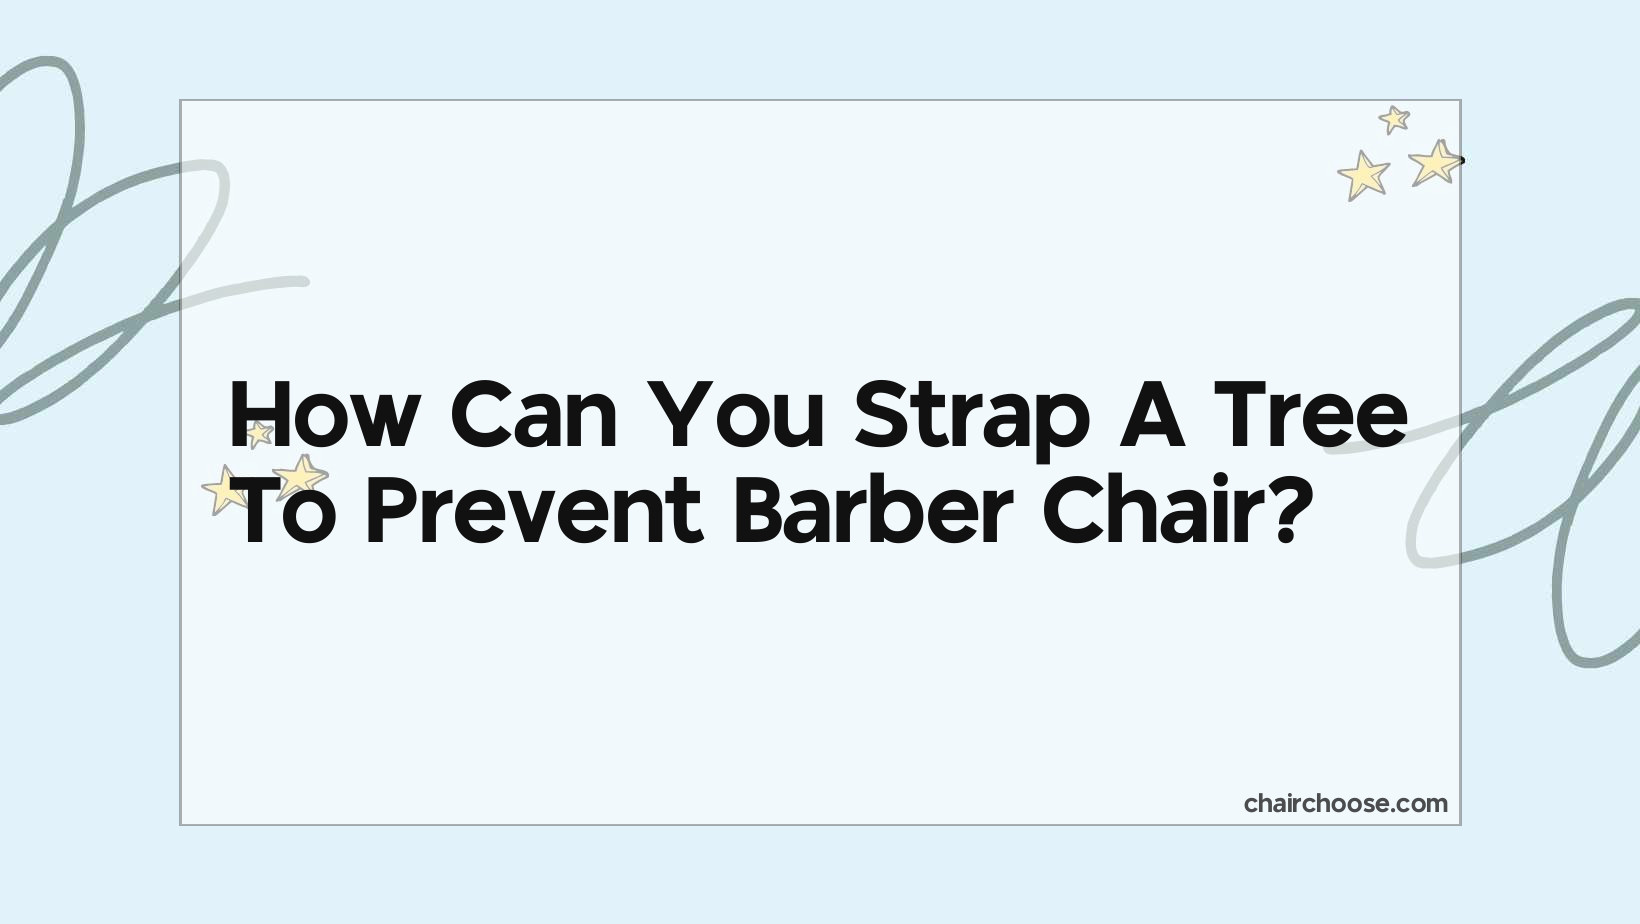 How Can You Strap A Tree To Prevent Barber Chair?